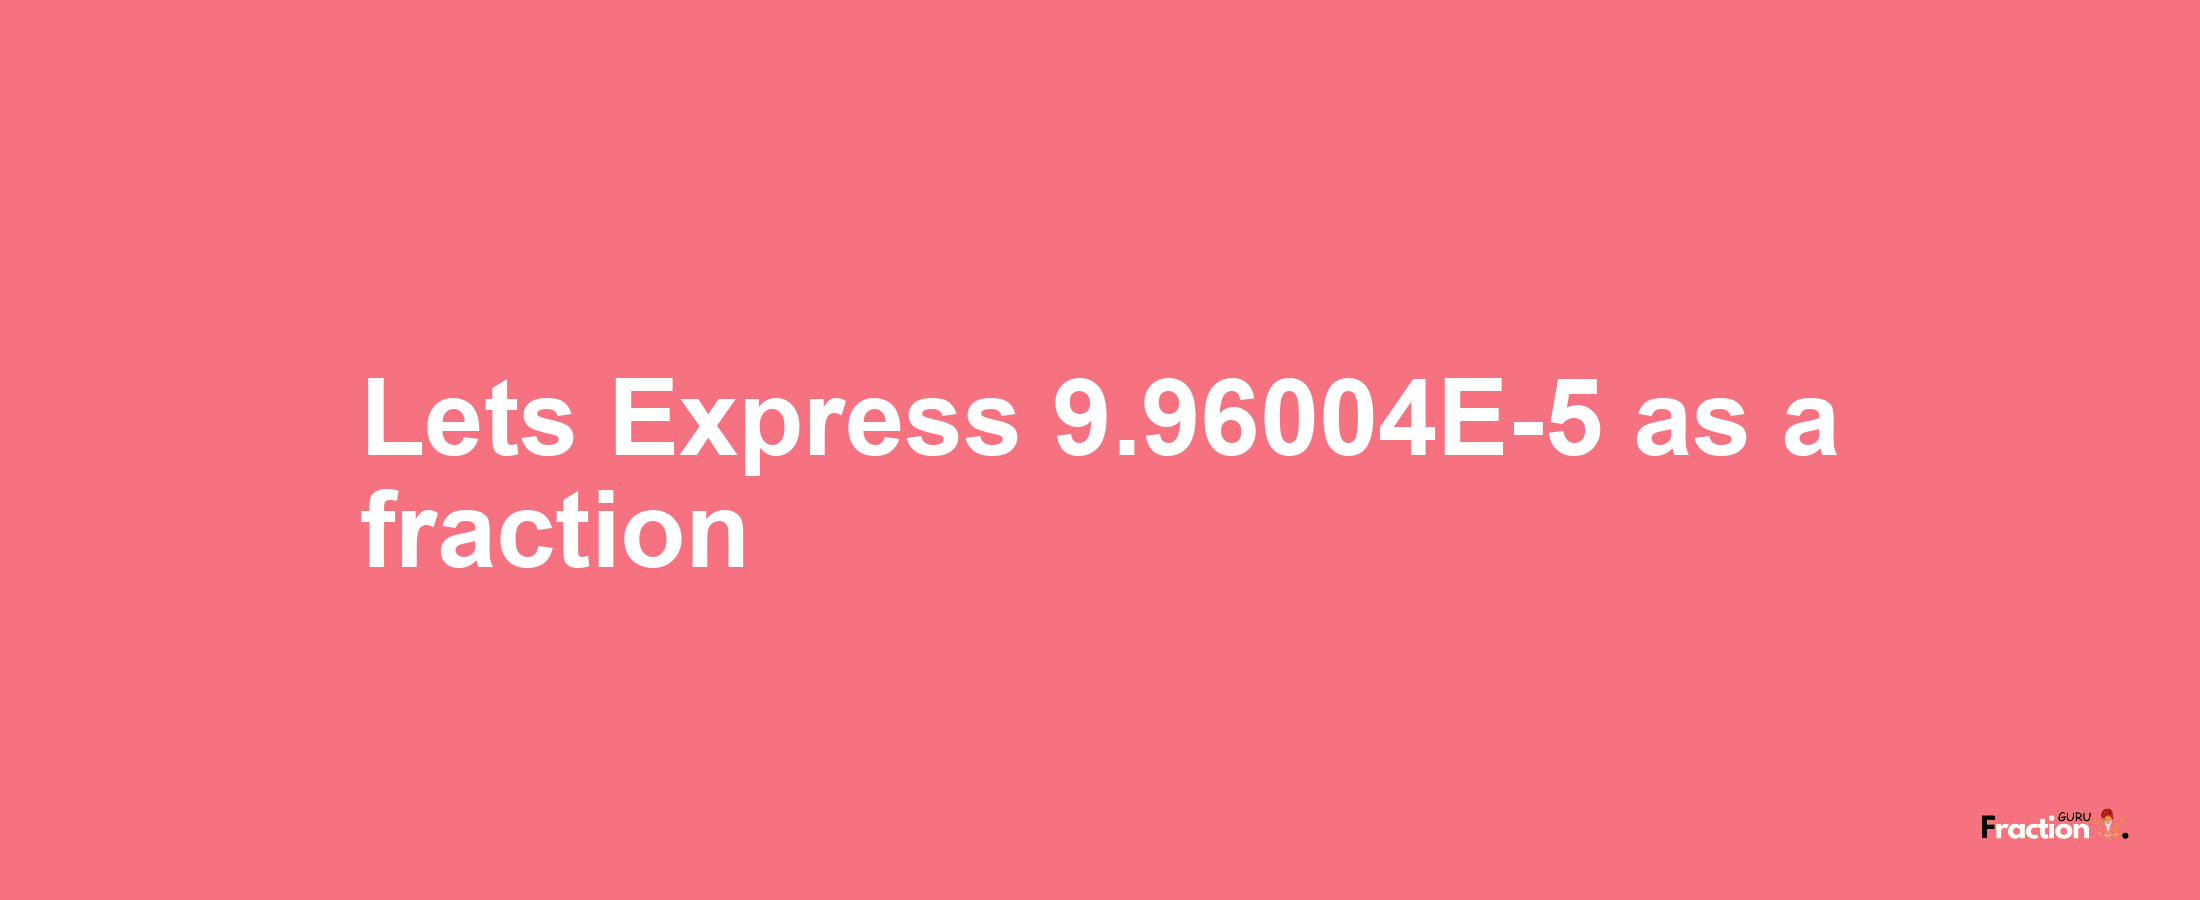 Lets Express 9.96004E-5 as afraction